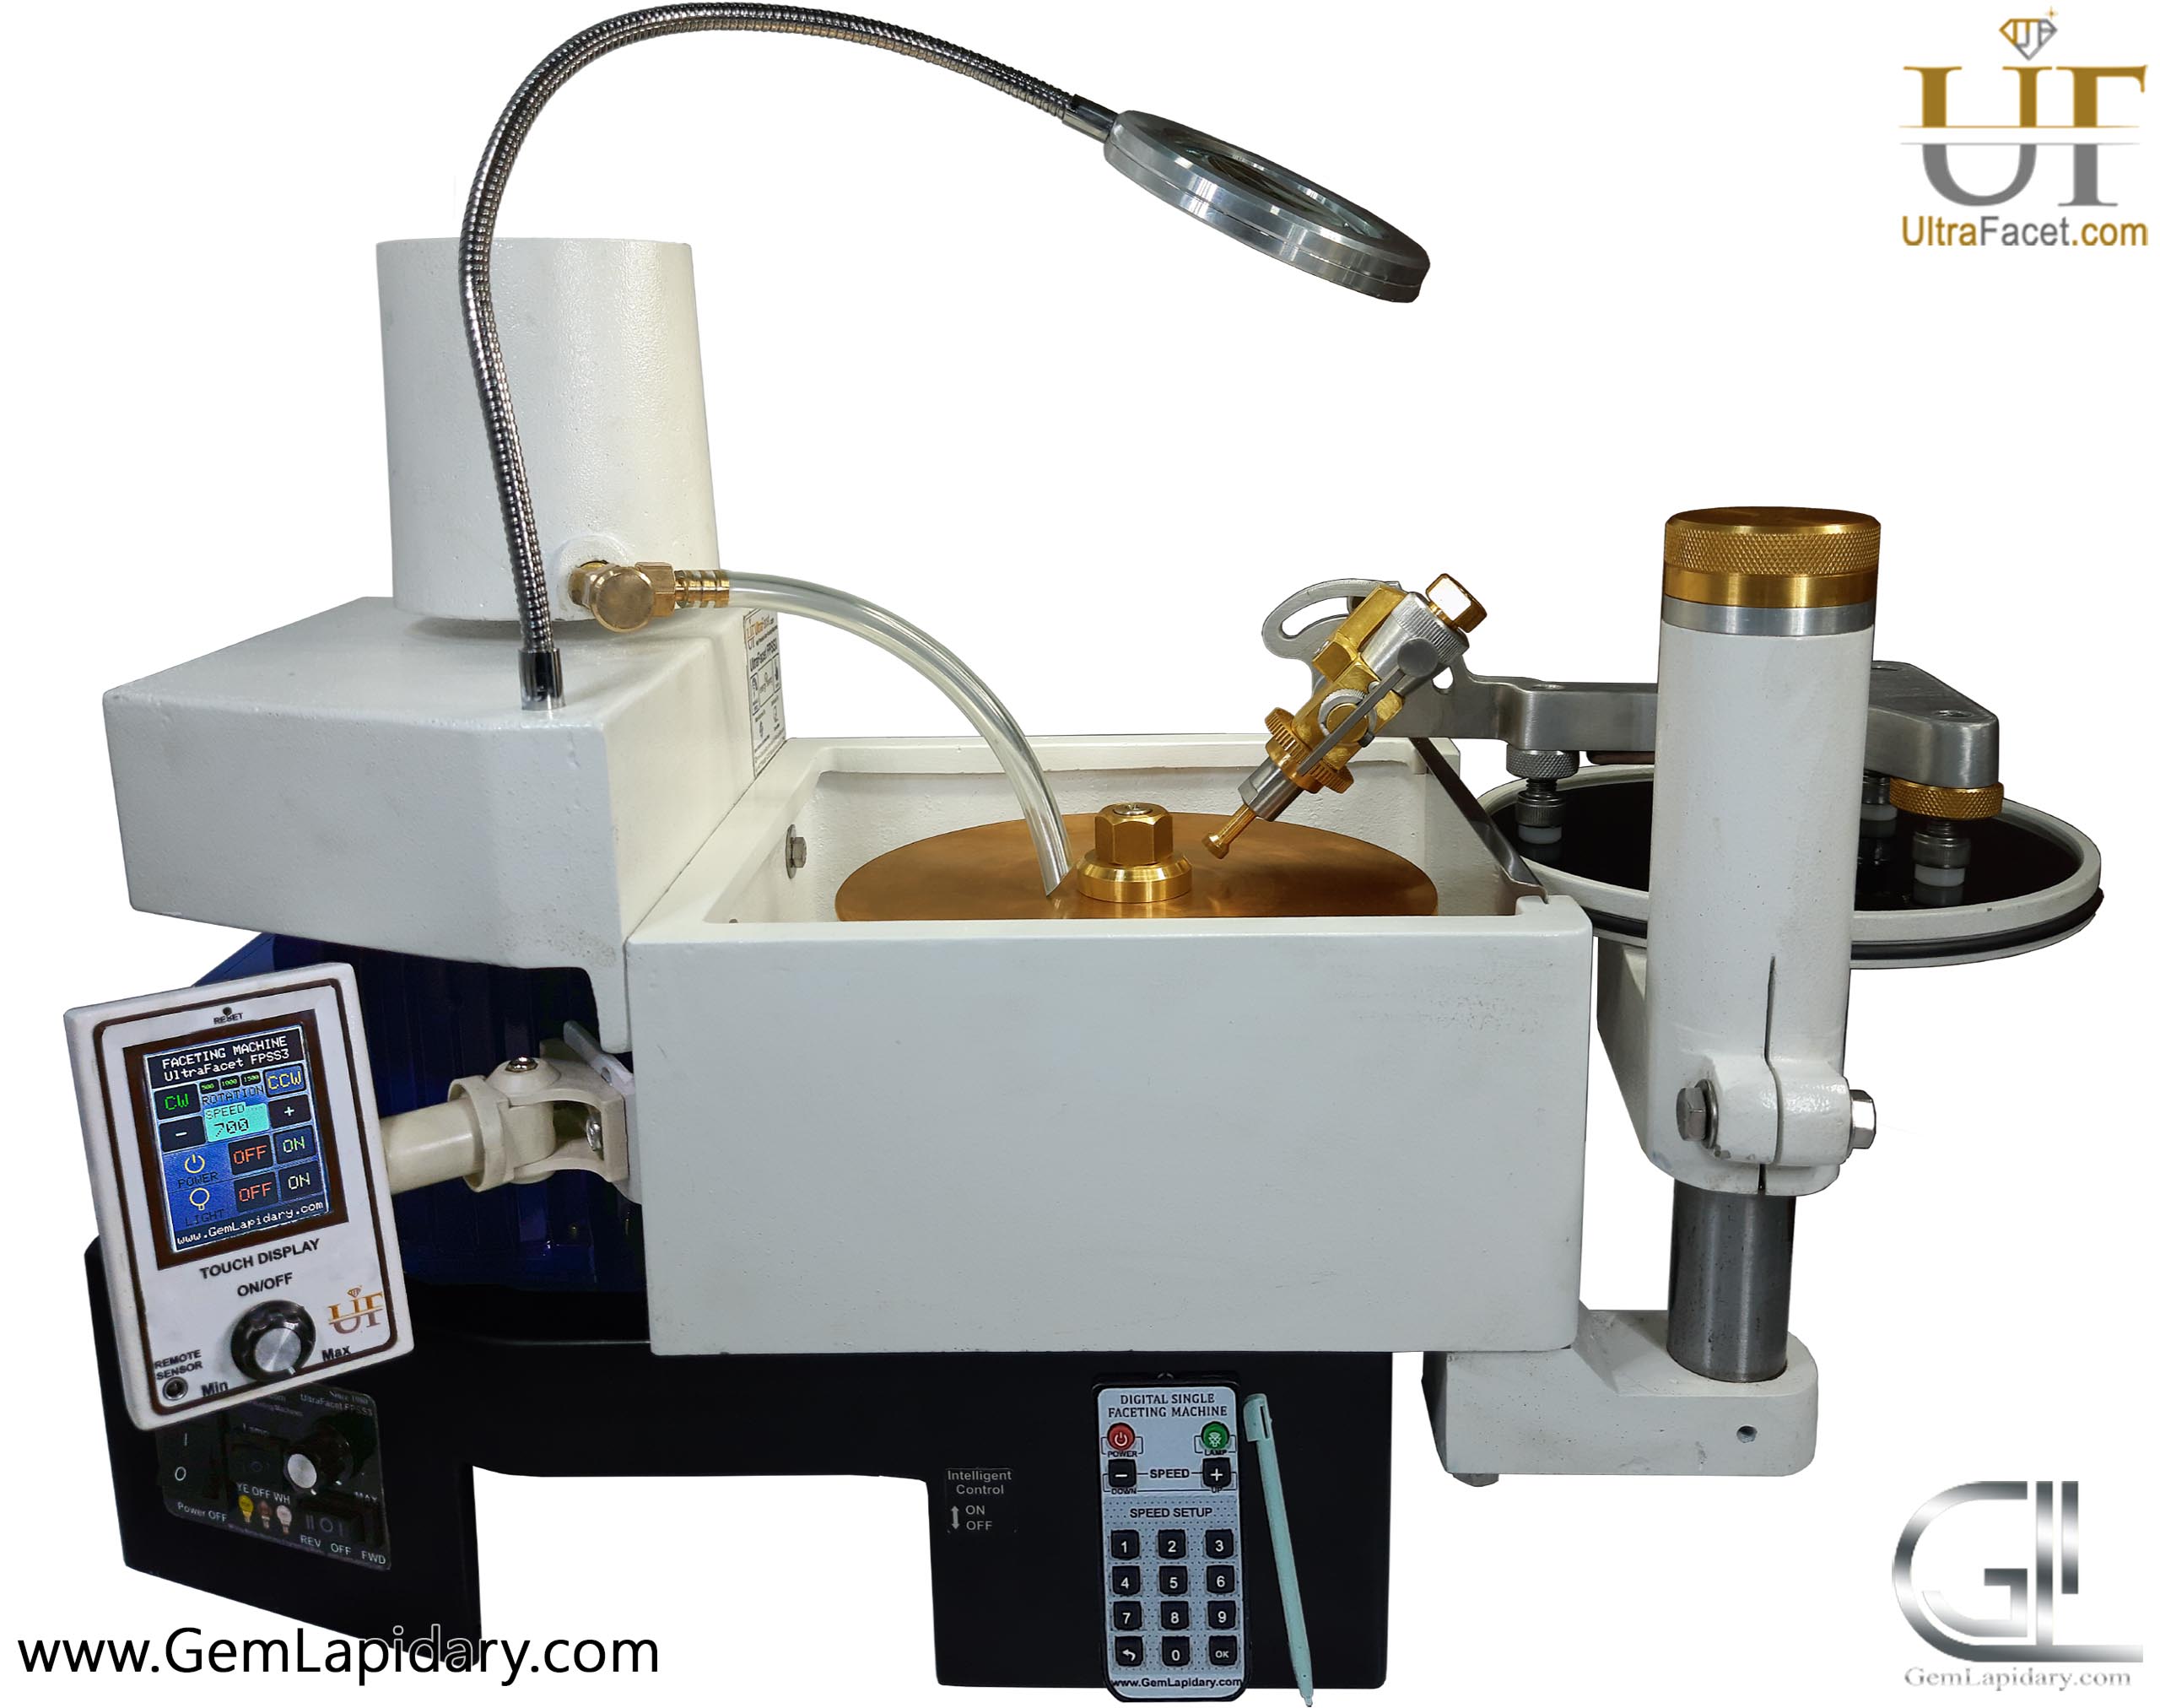 The Chula Automatic Faceting Machine